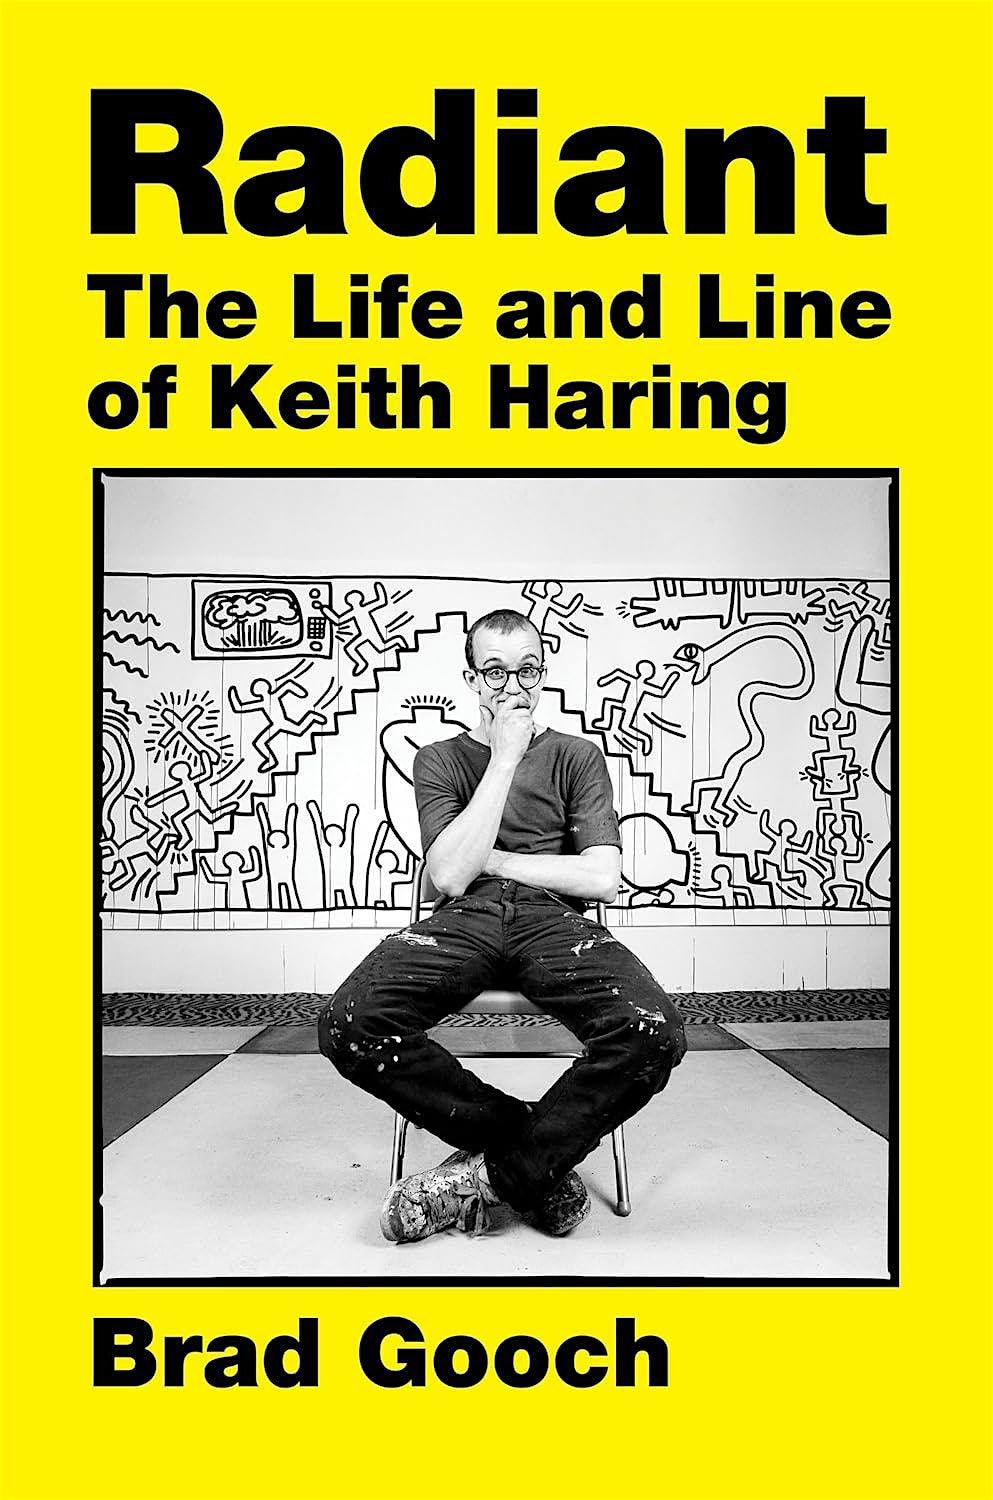 Radiant: The Life and Line of Keith Haring w\/Brad Gooch 7\/26 - Ptown Event